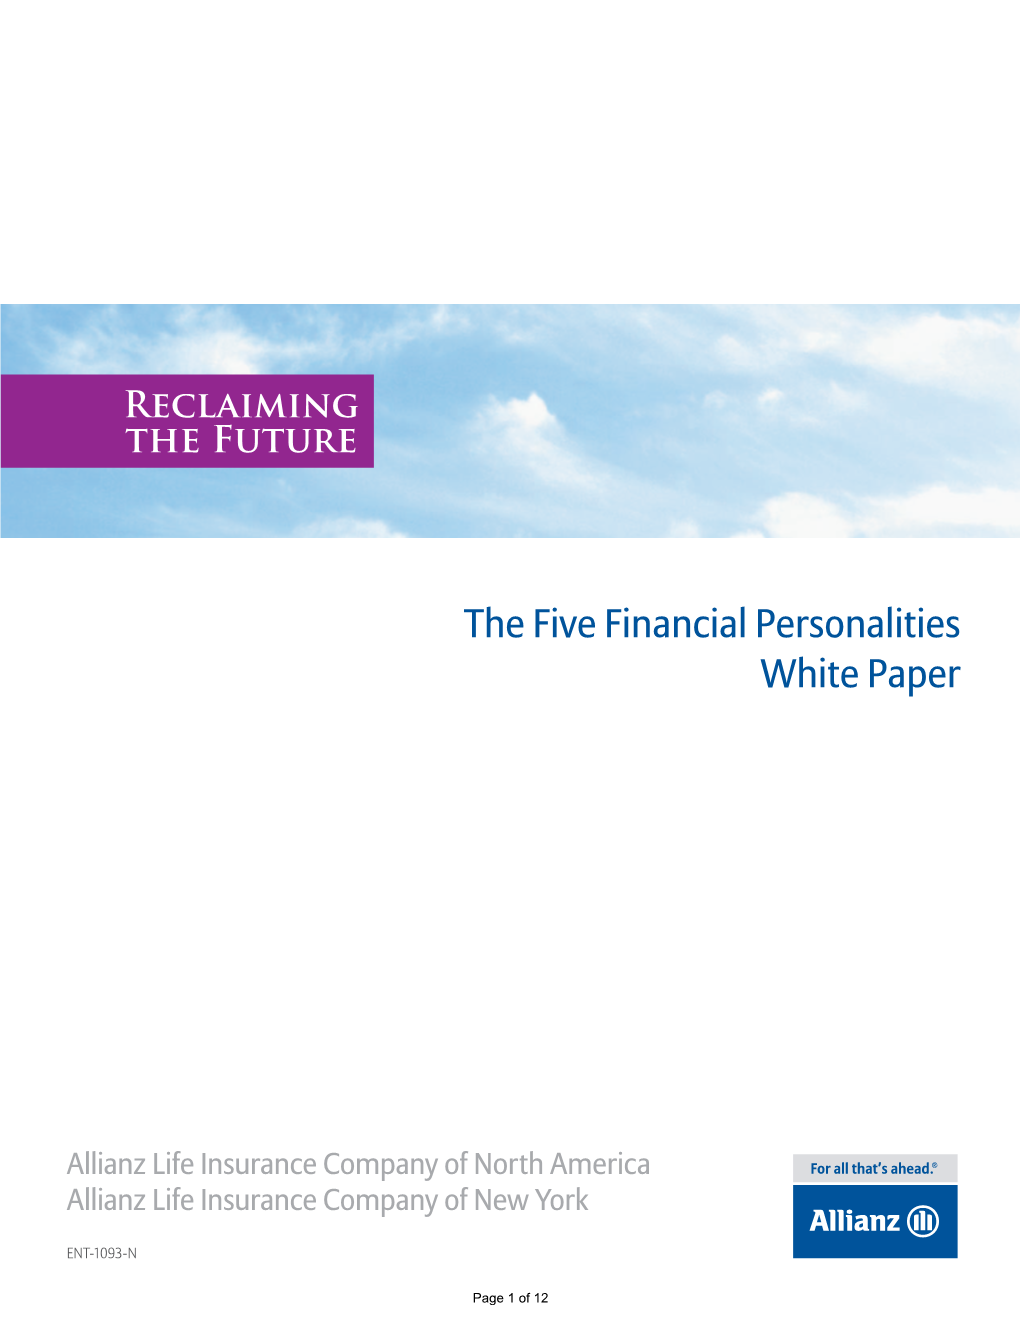 The Five Financial Personalities White Paper